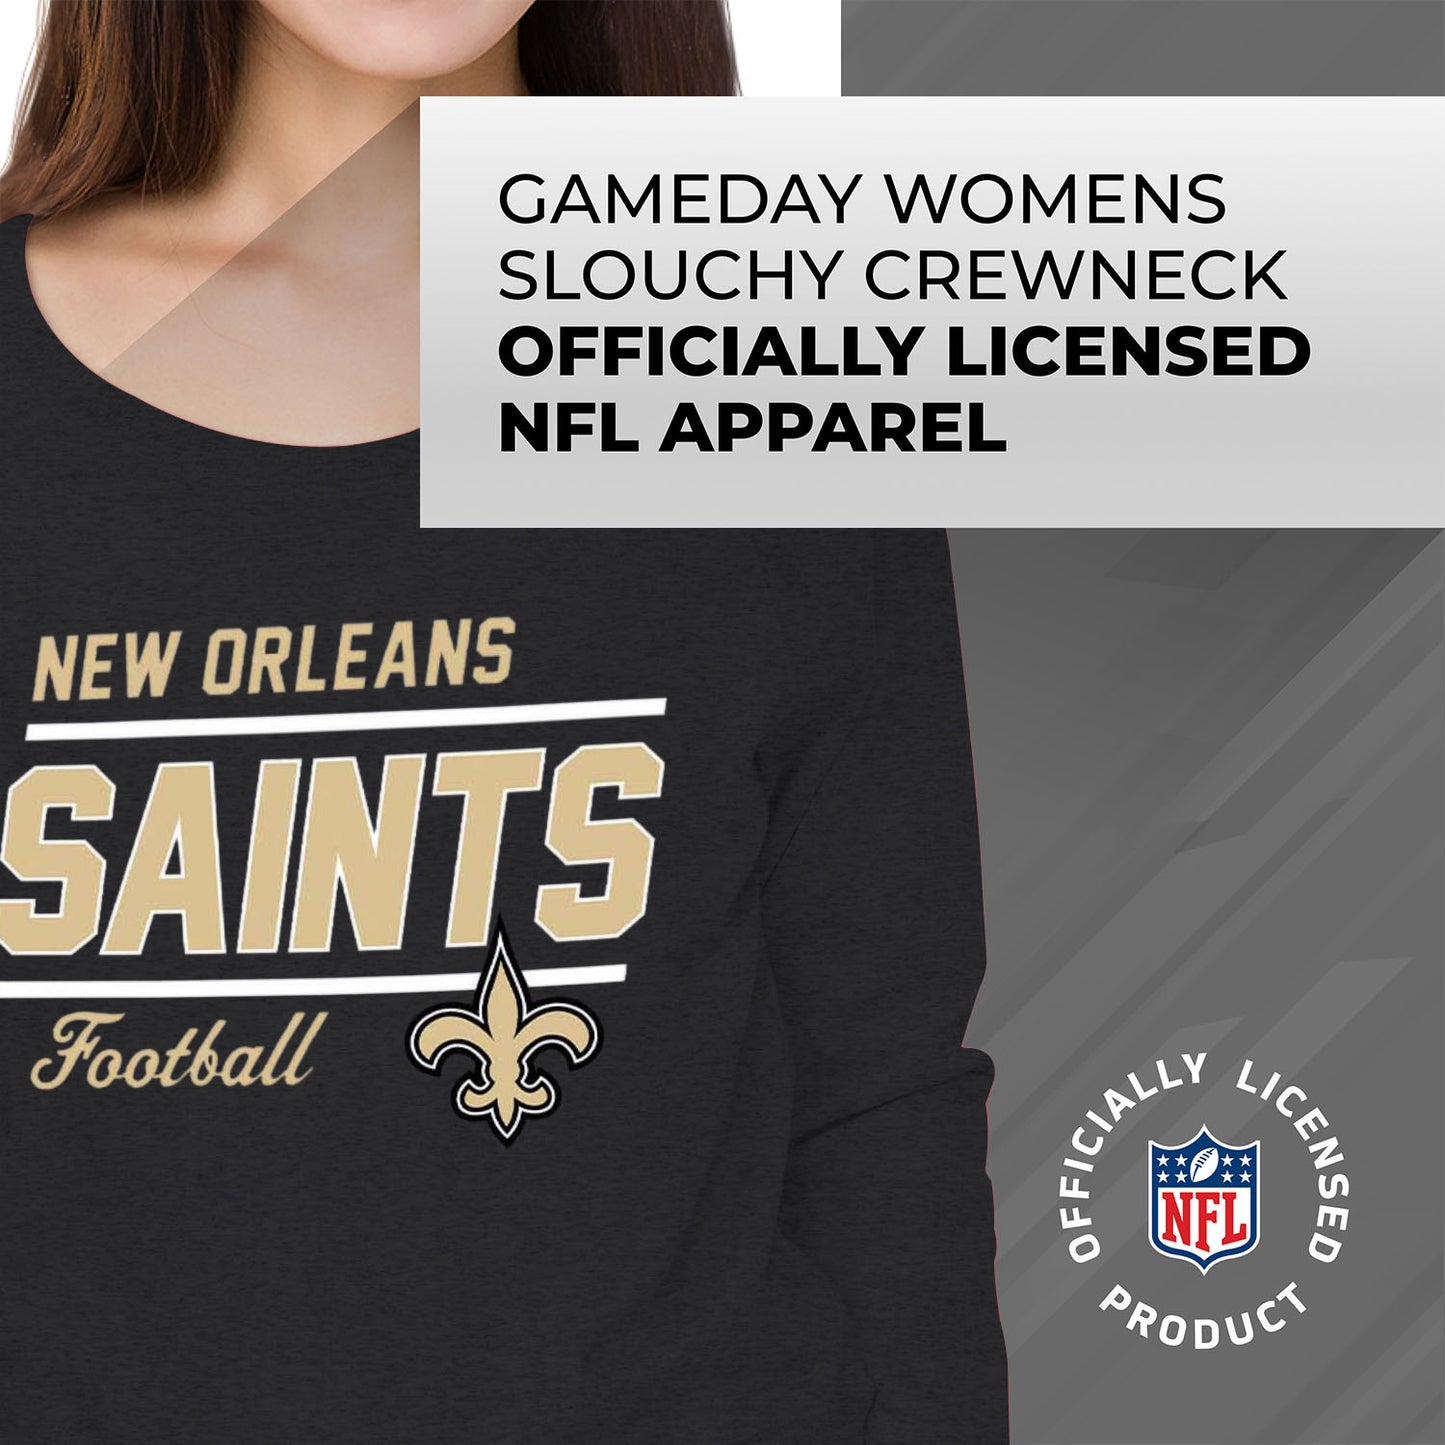 New Orleans Saints NFL Womens Crew Neck Light Weight - Charcoal